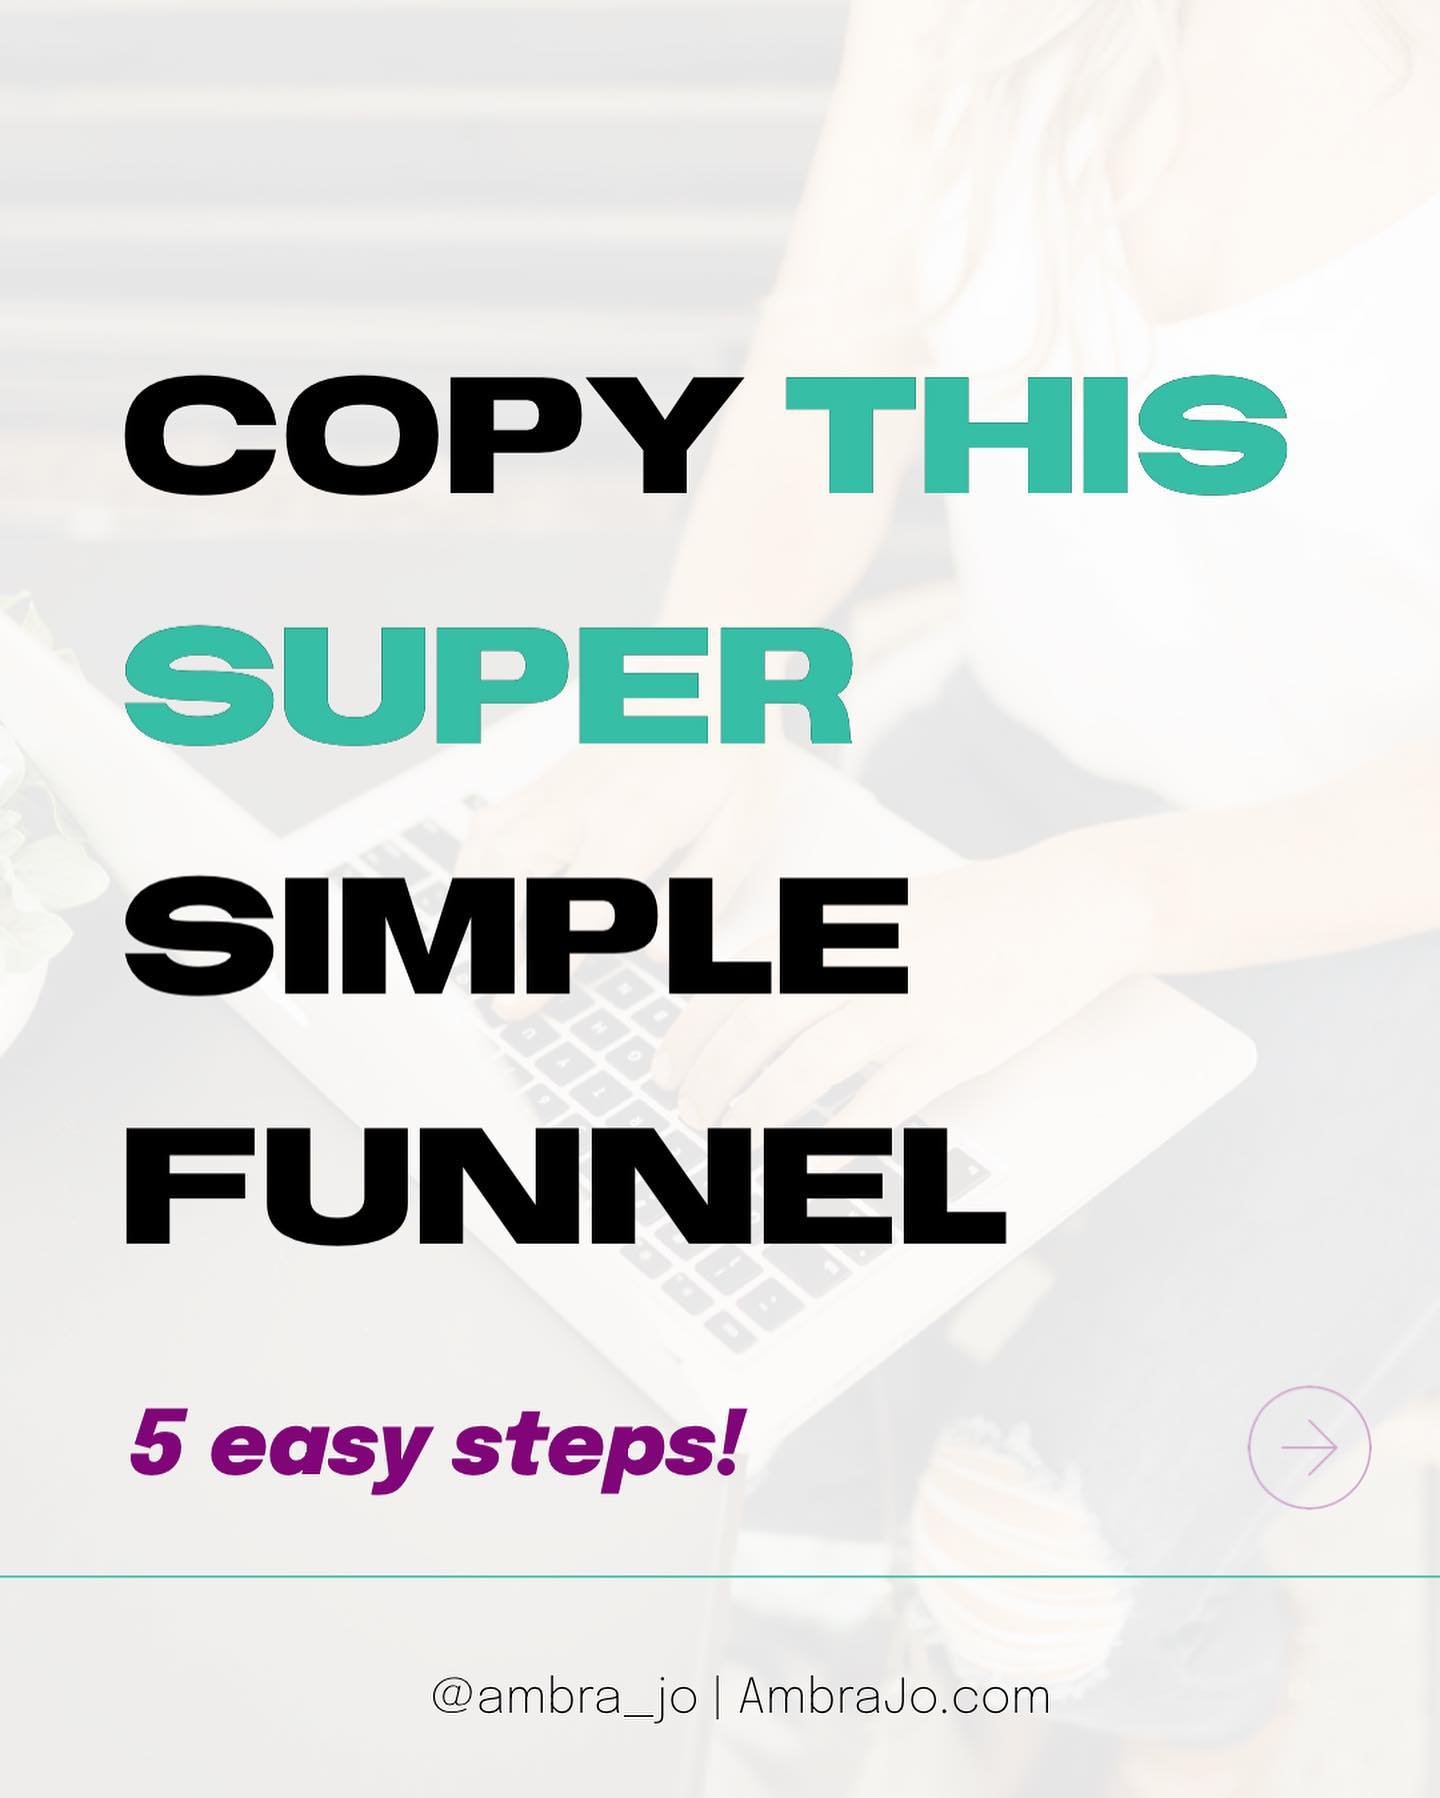 EASY 5 STEP FUNNEL to GROW your EMAIL LIST 🎉👇

1. Turn a popular social post into a pdf. (Doesn&rsquo;t need to be fancy.)

2. Upload it into a Drive folder and get the shareable l!nk

3. Go to @flodesk and create an opt-in form. Simple process. Ad